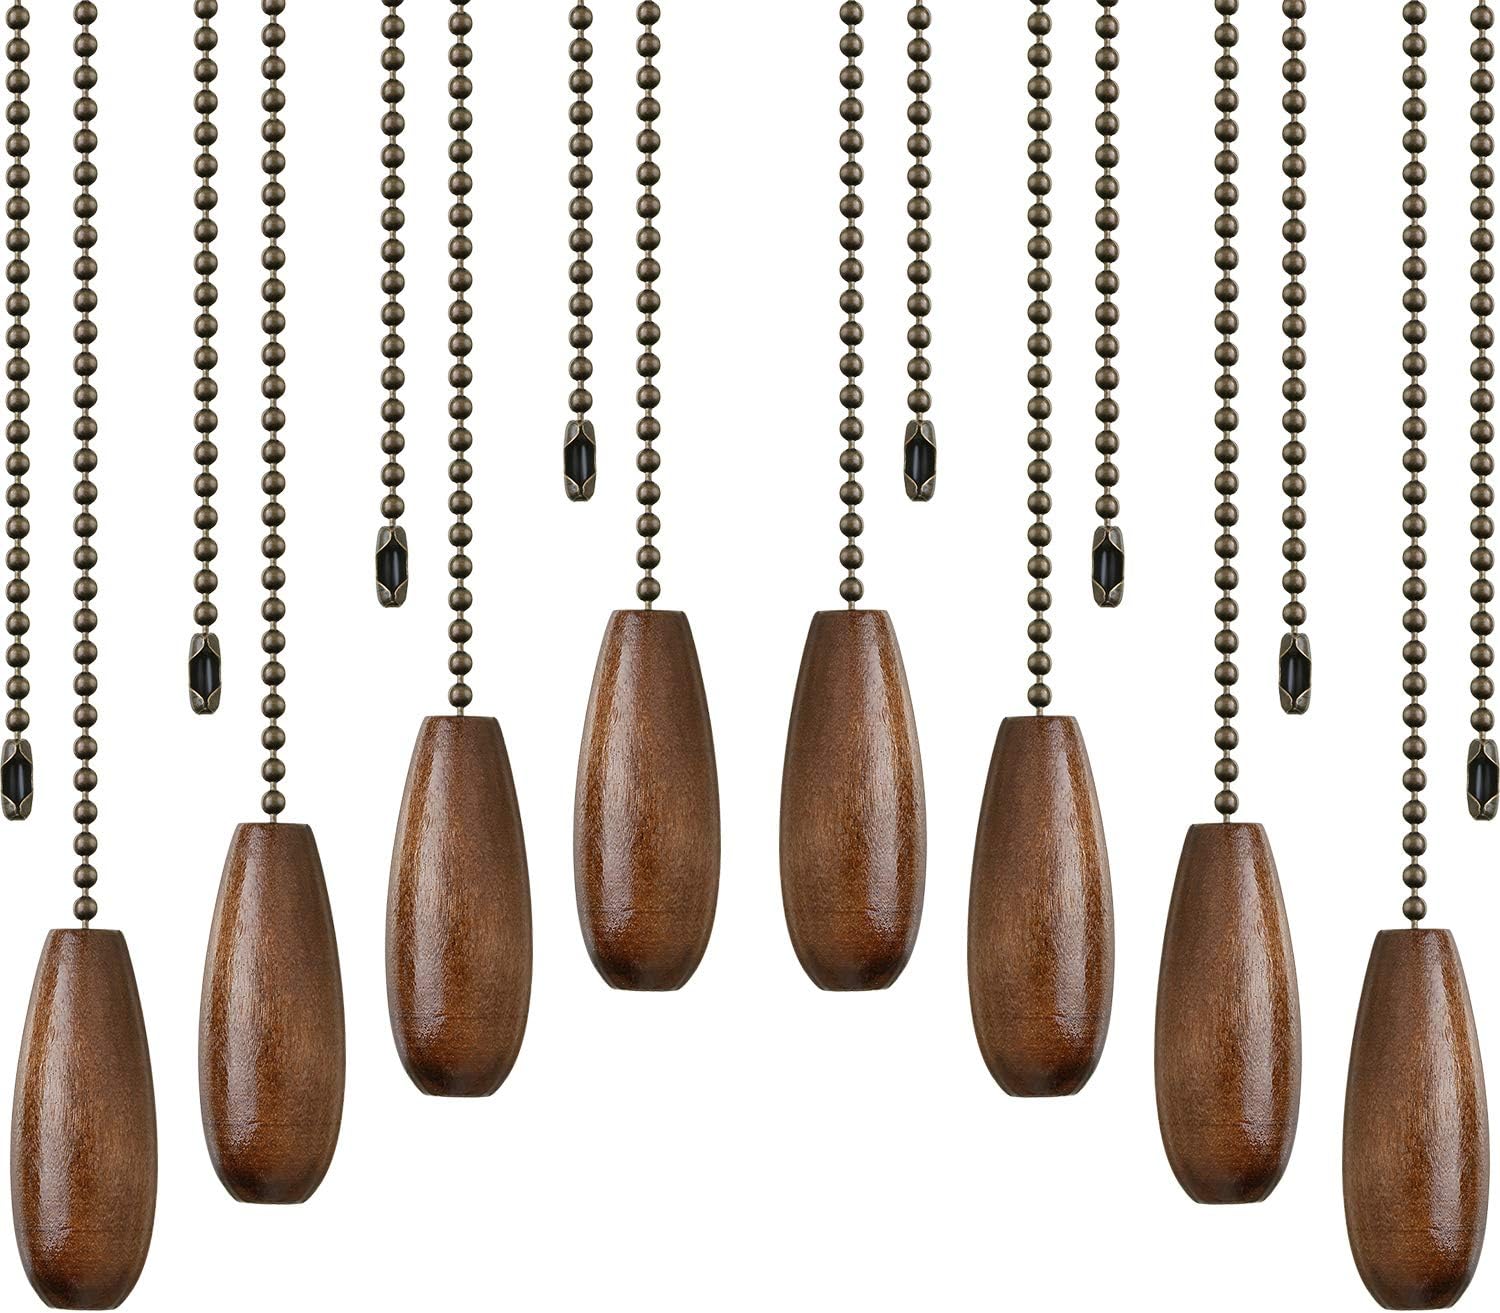 BOAO iSH09-M625254mn 8 Pieces Ceiling Fan Pull Chains Extender Wooden  Pendant Pull Chain Extension for Ceiling Light Lamp Fan Chain (Walnut Color)